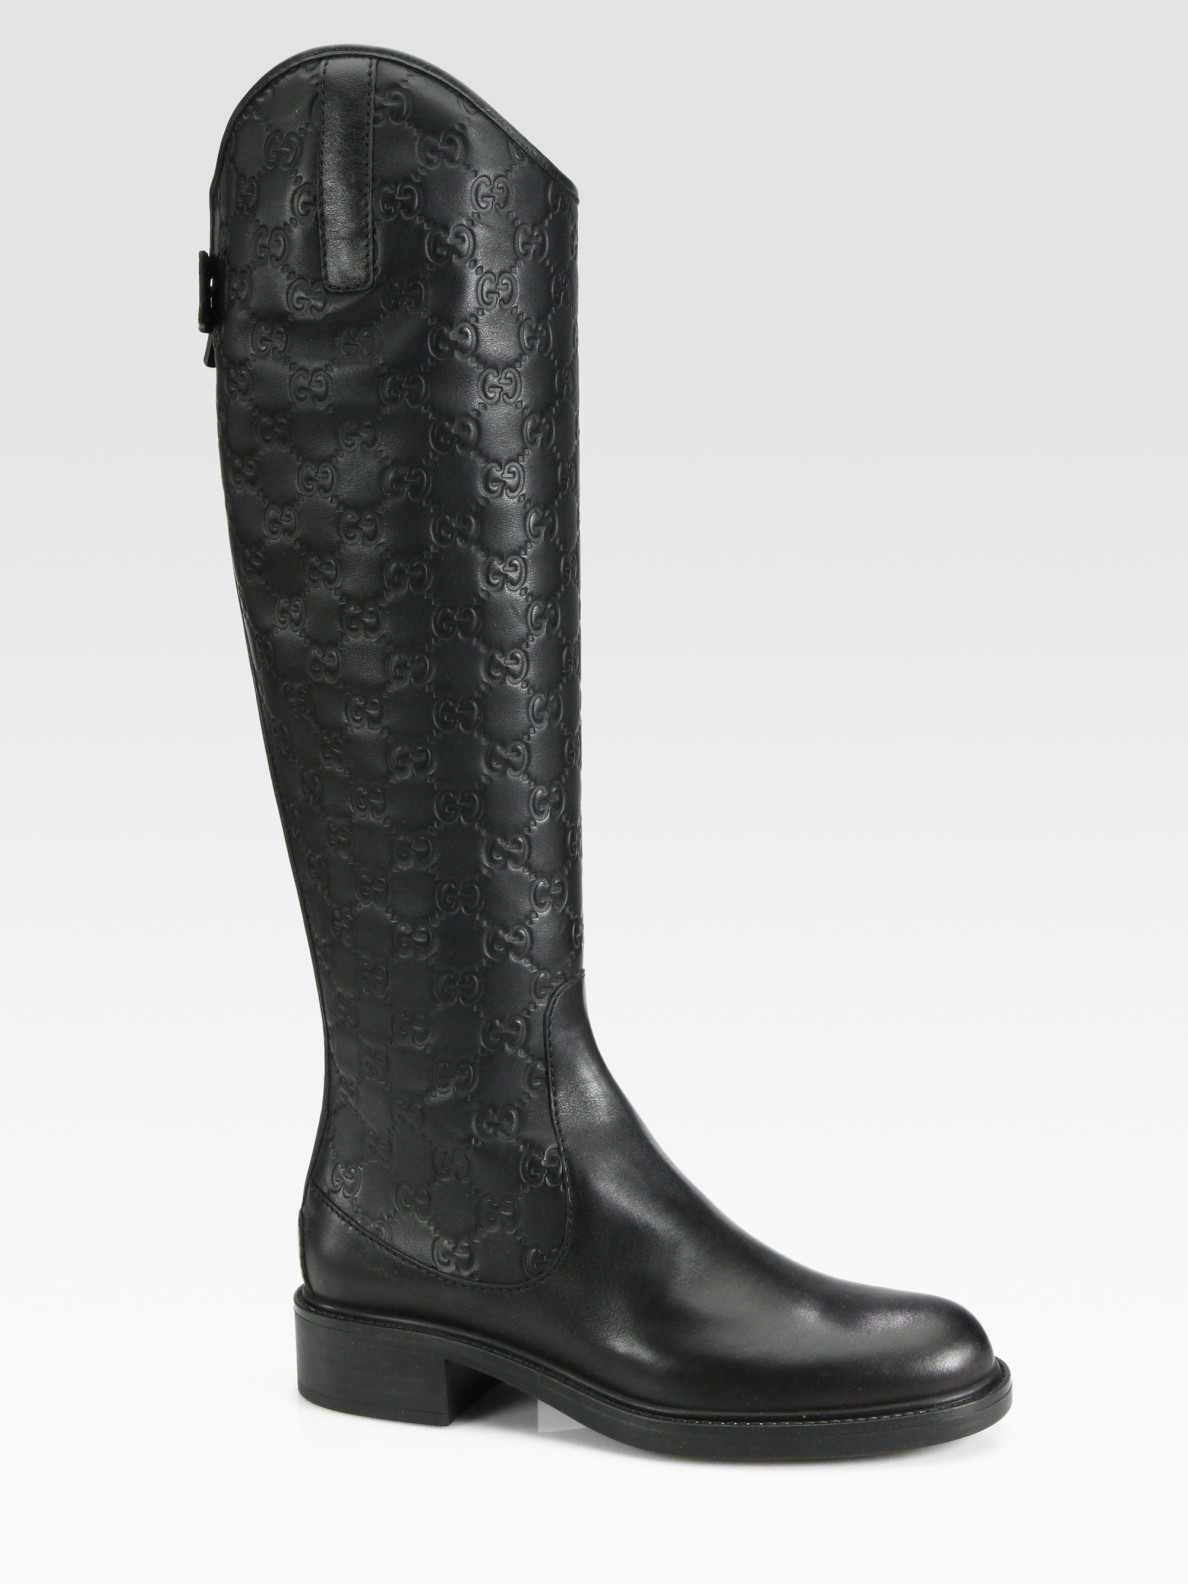 Gucci Maud Leather Knee-High Boots in Black | Lyst